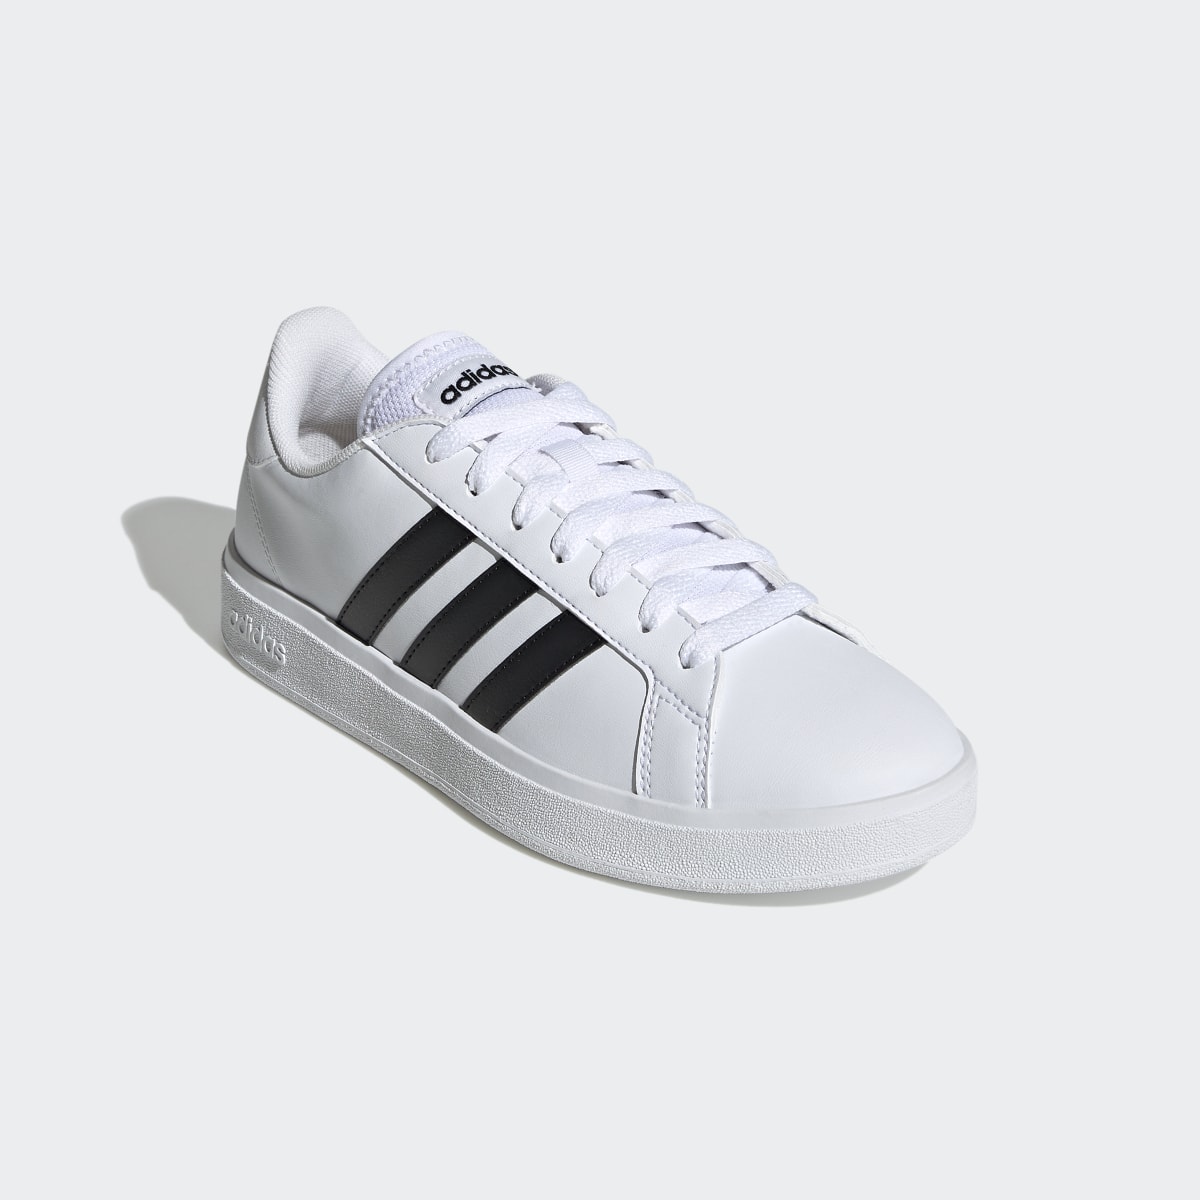 Adidas Chaussure Grand Court TD Lifestyle Court Casual. 5